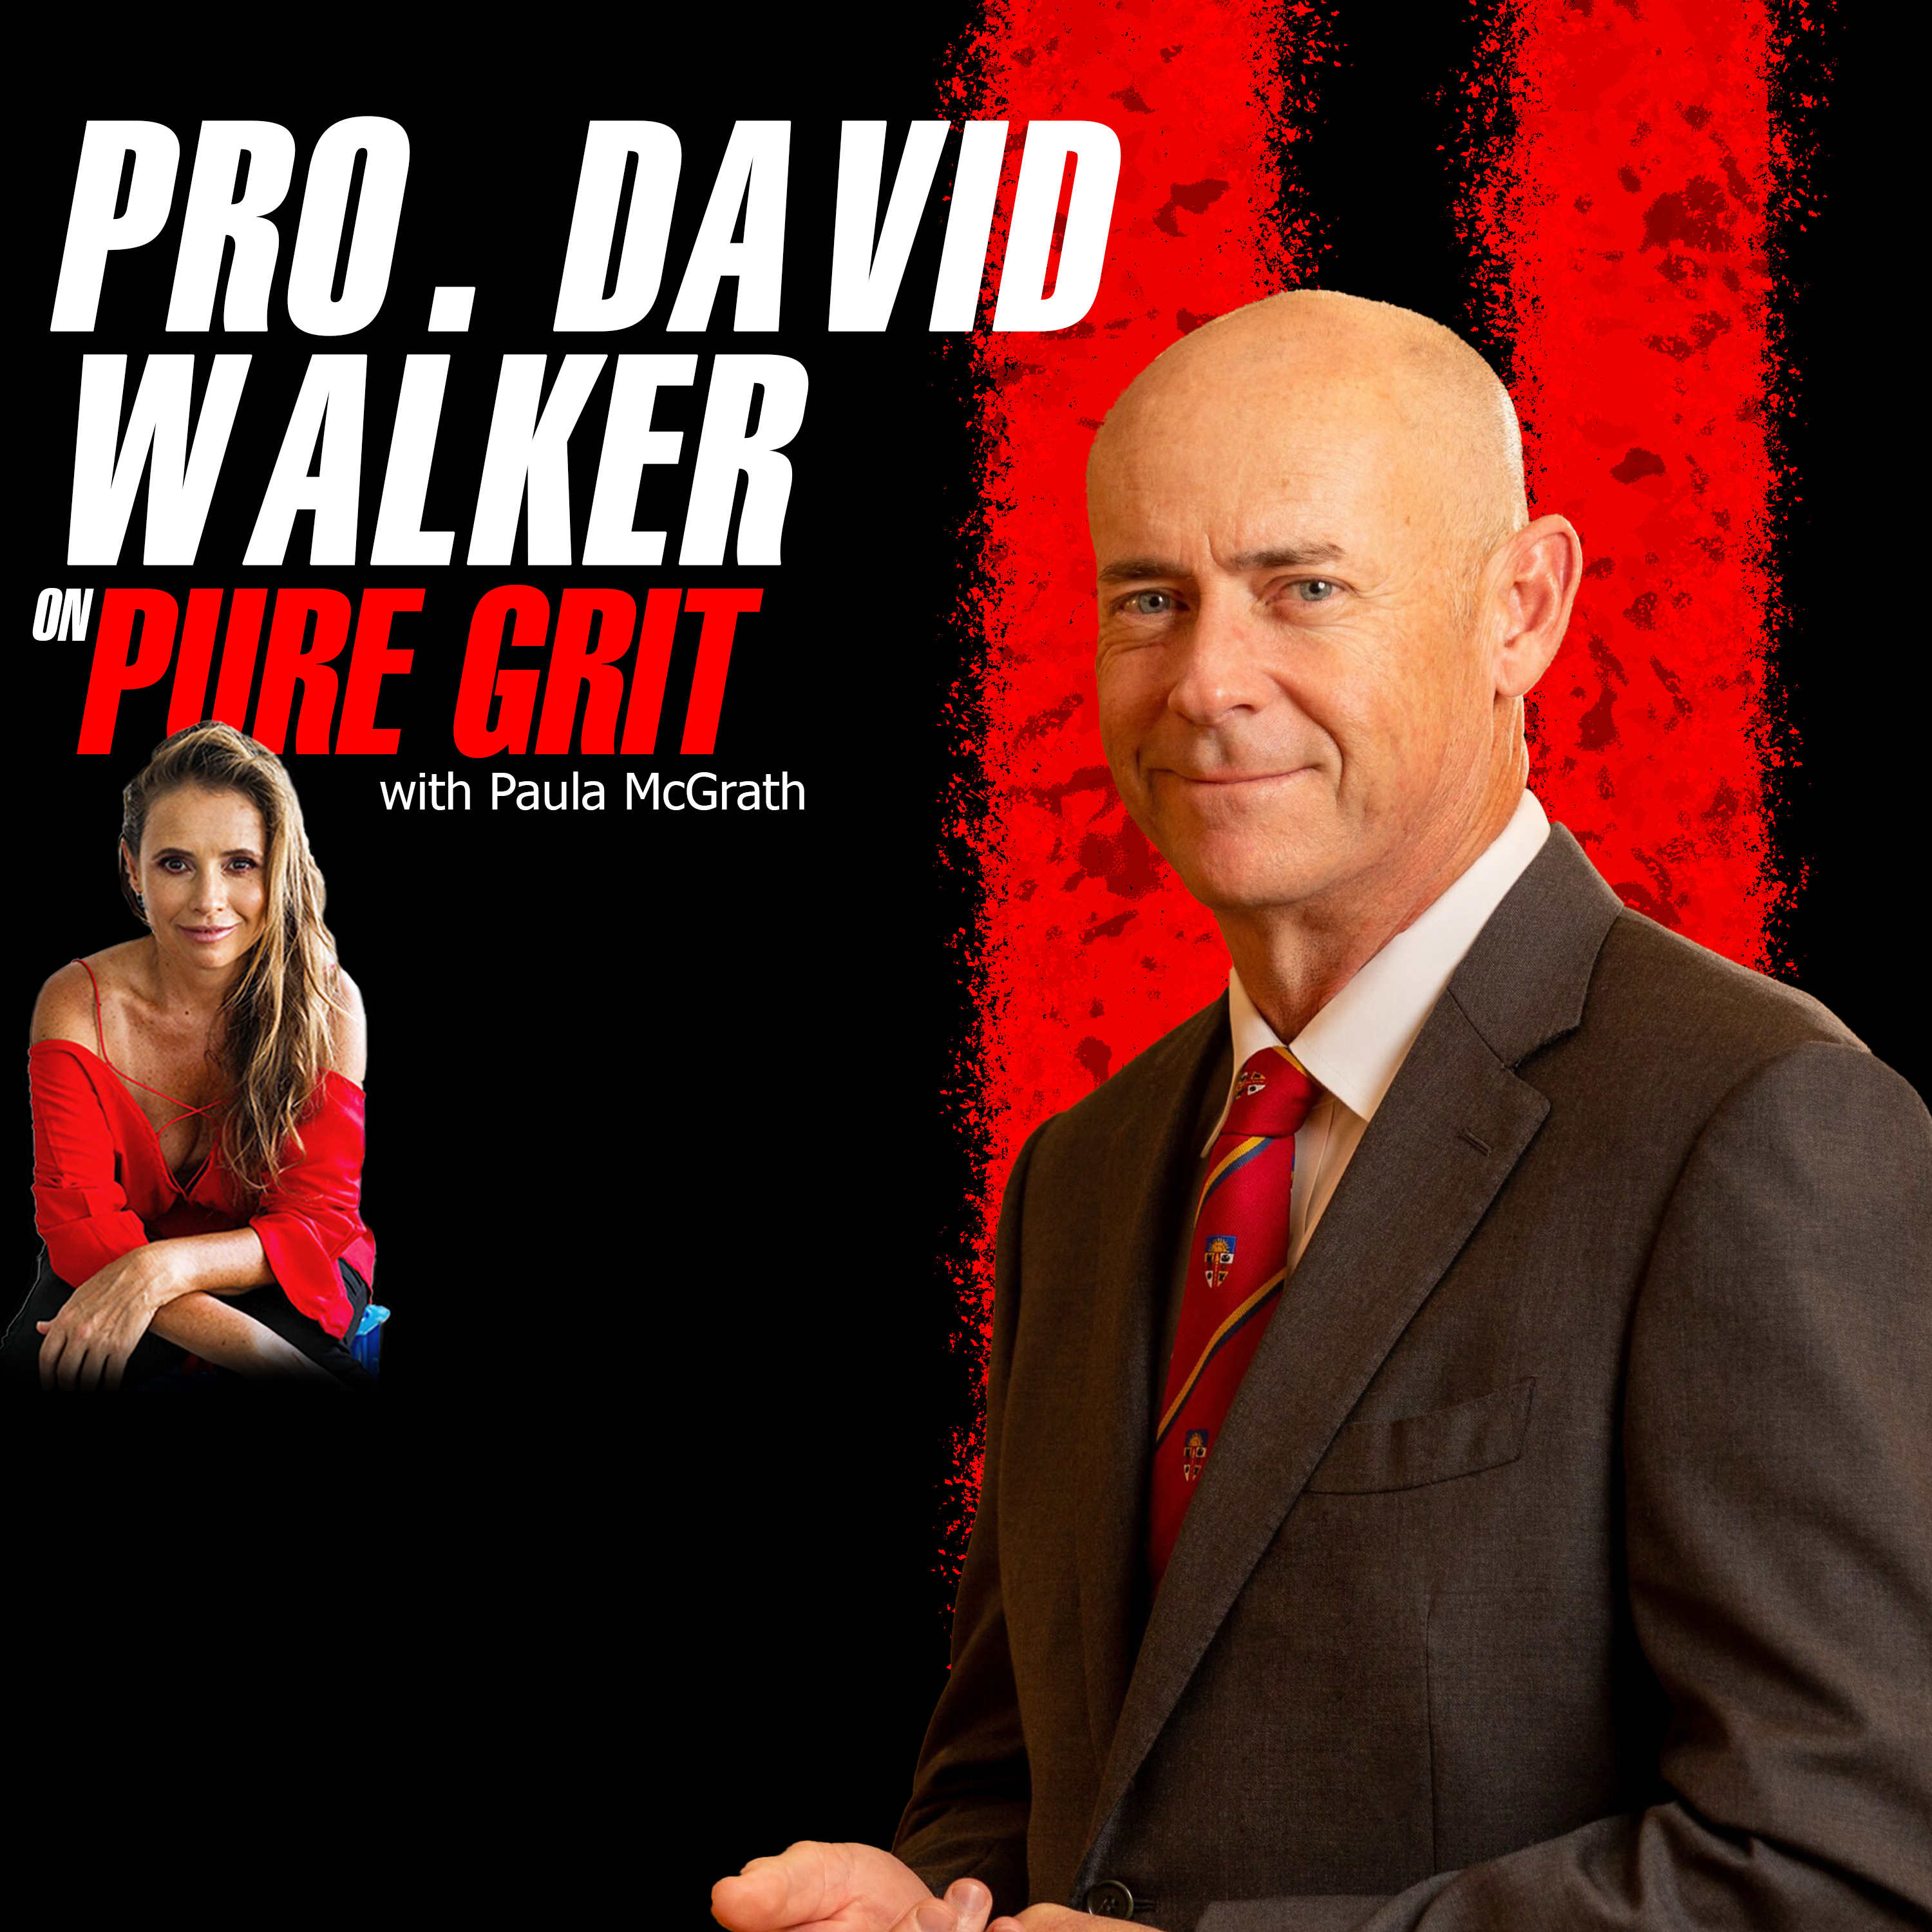 The Brain Surgeon You’ll Never Forget – An Intimate Chat with Prof. David Walker!